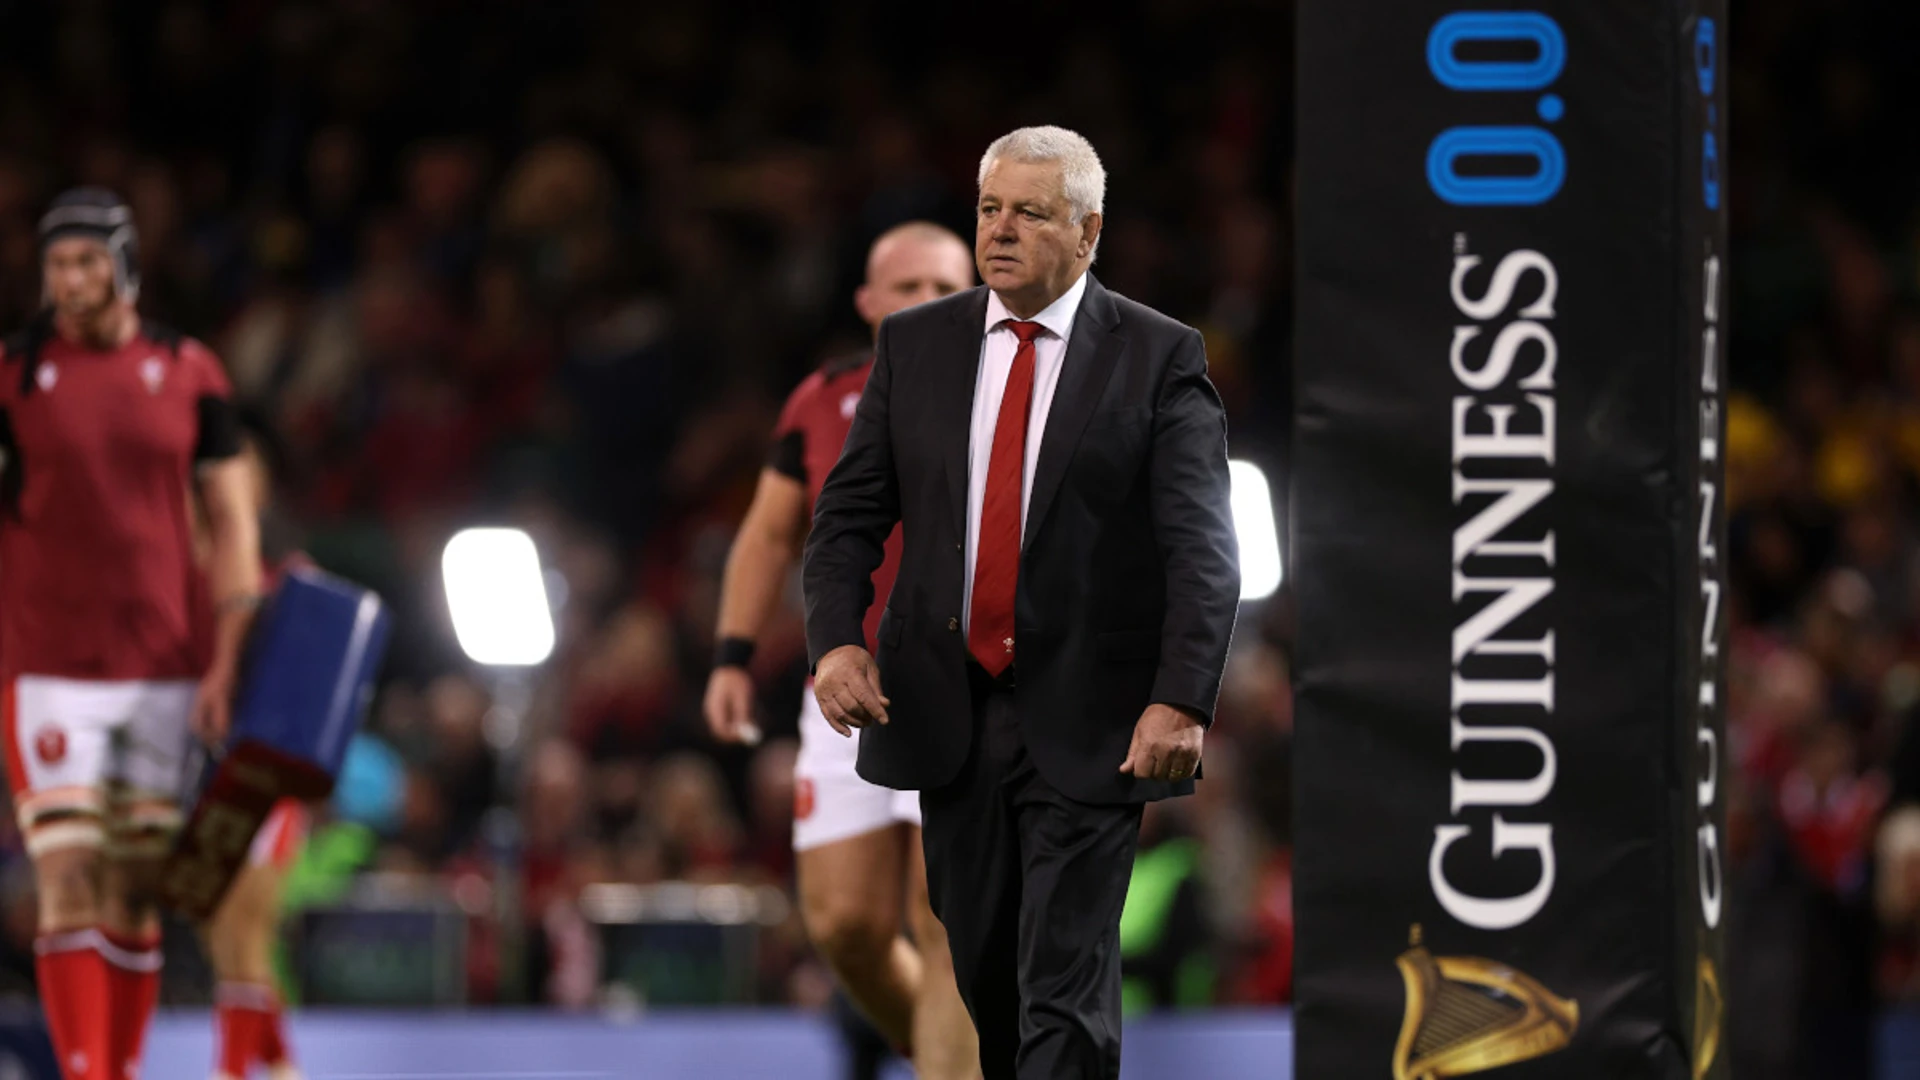 You have to withstand pain to beat Boks - Gatland